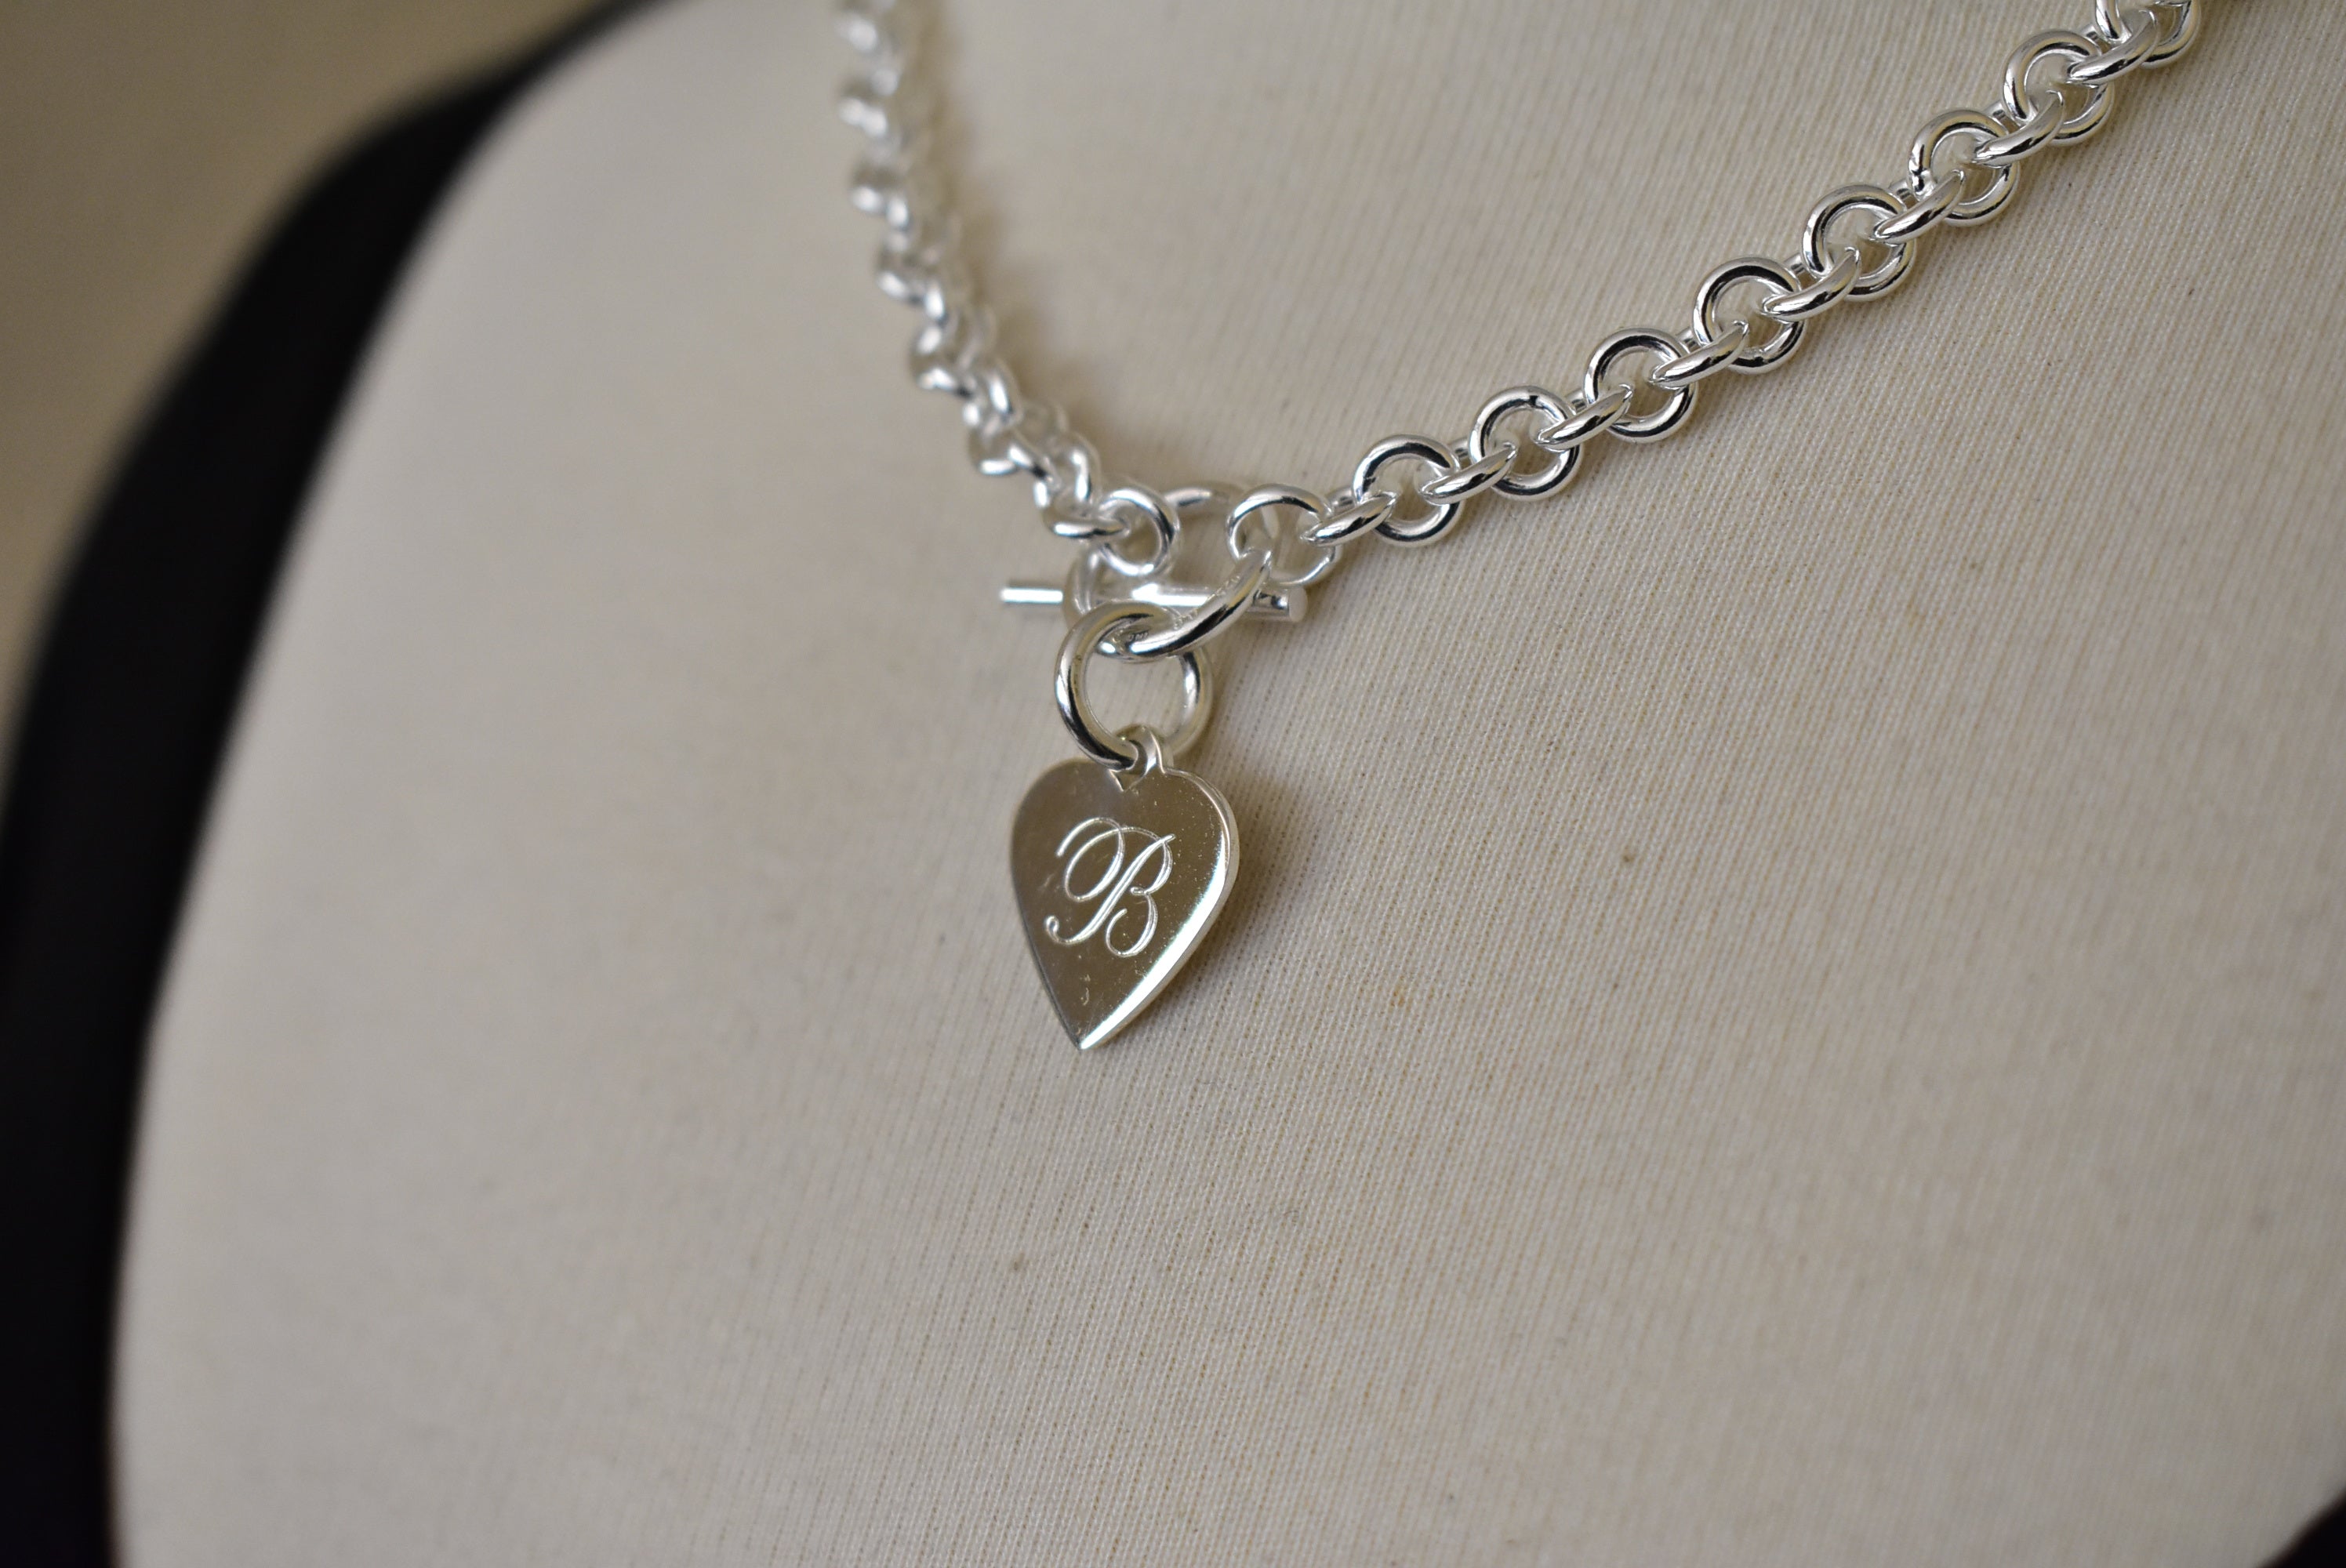 Heart Sterling Silver Engraved Charm Bracelet with Toggle